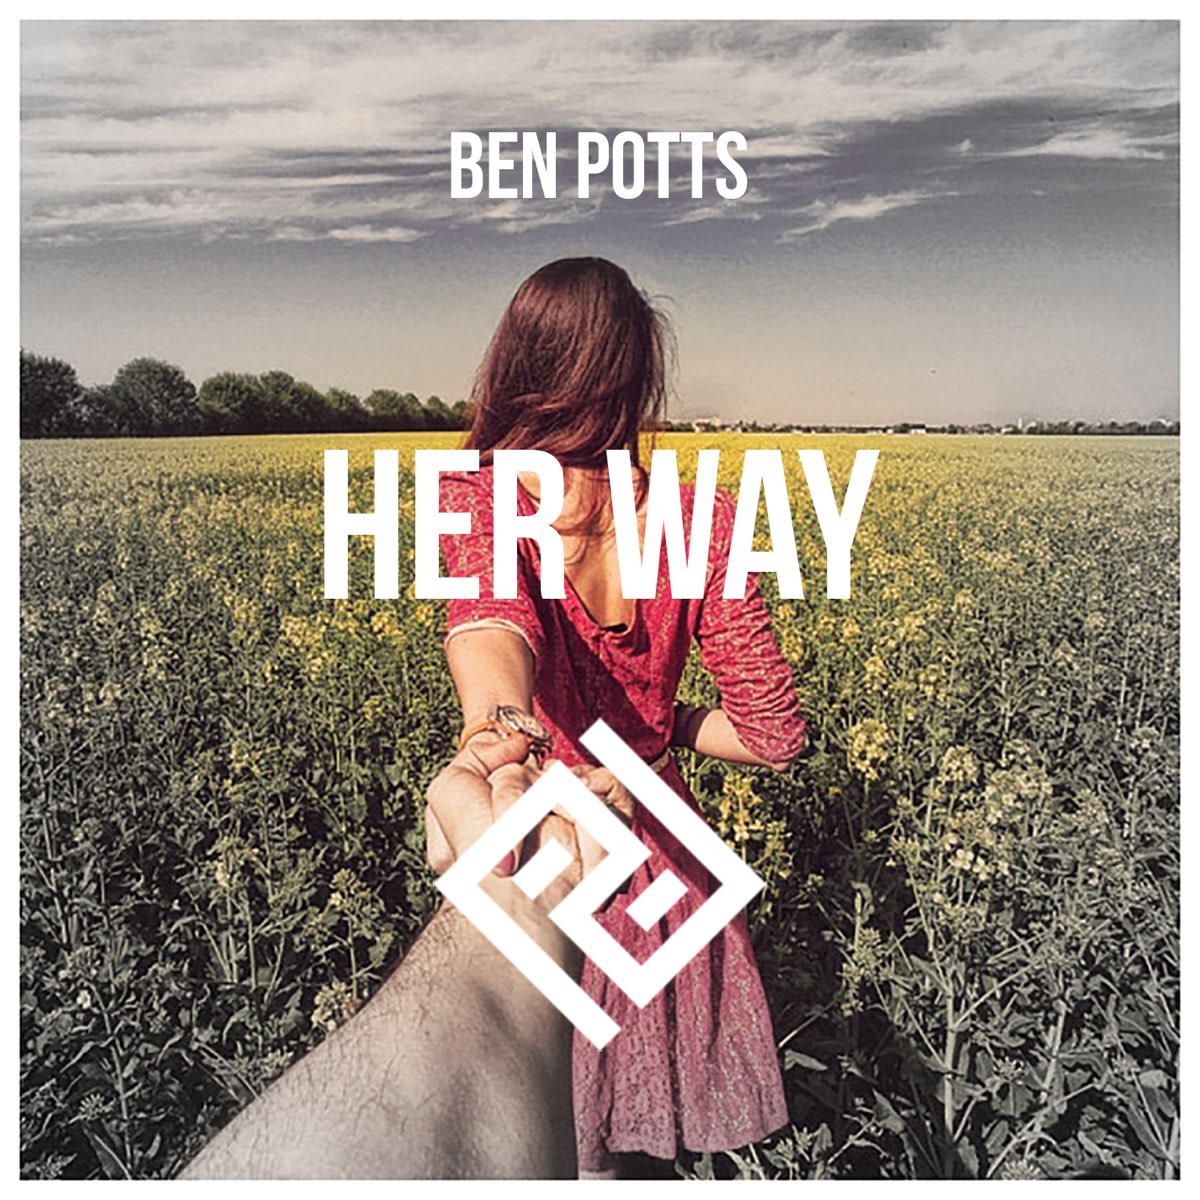 She ways. Ben way. A way for her.